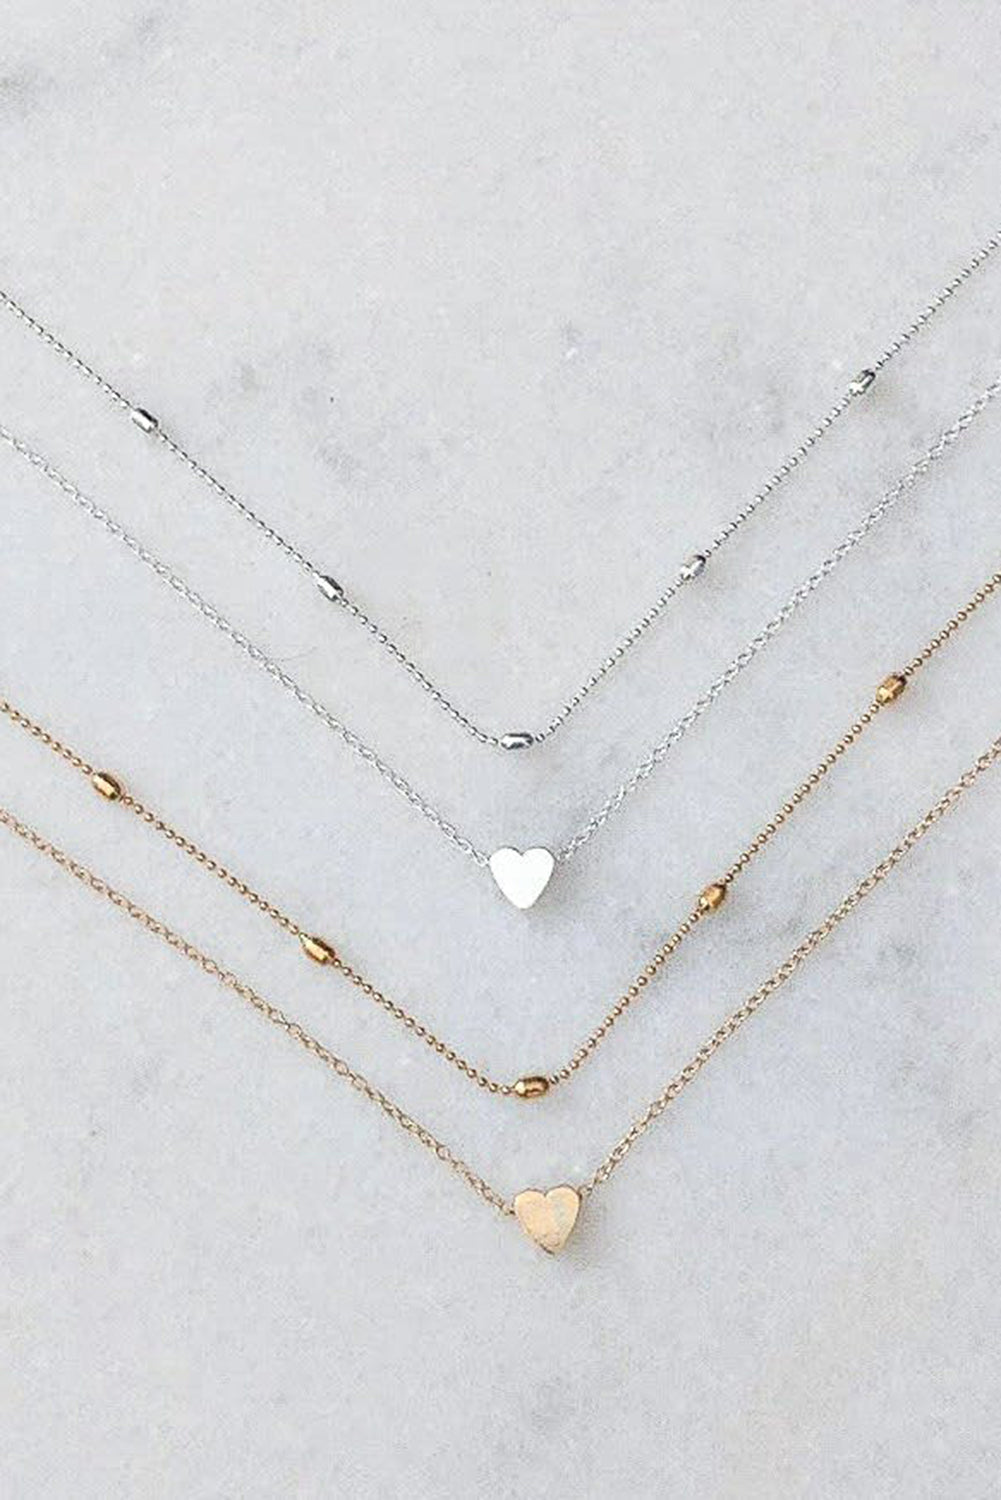 LC013505-12, Gold Valentine Heart Shaped Double Layered Chain Necklace Accessories Gift for Her